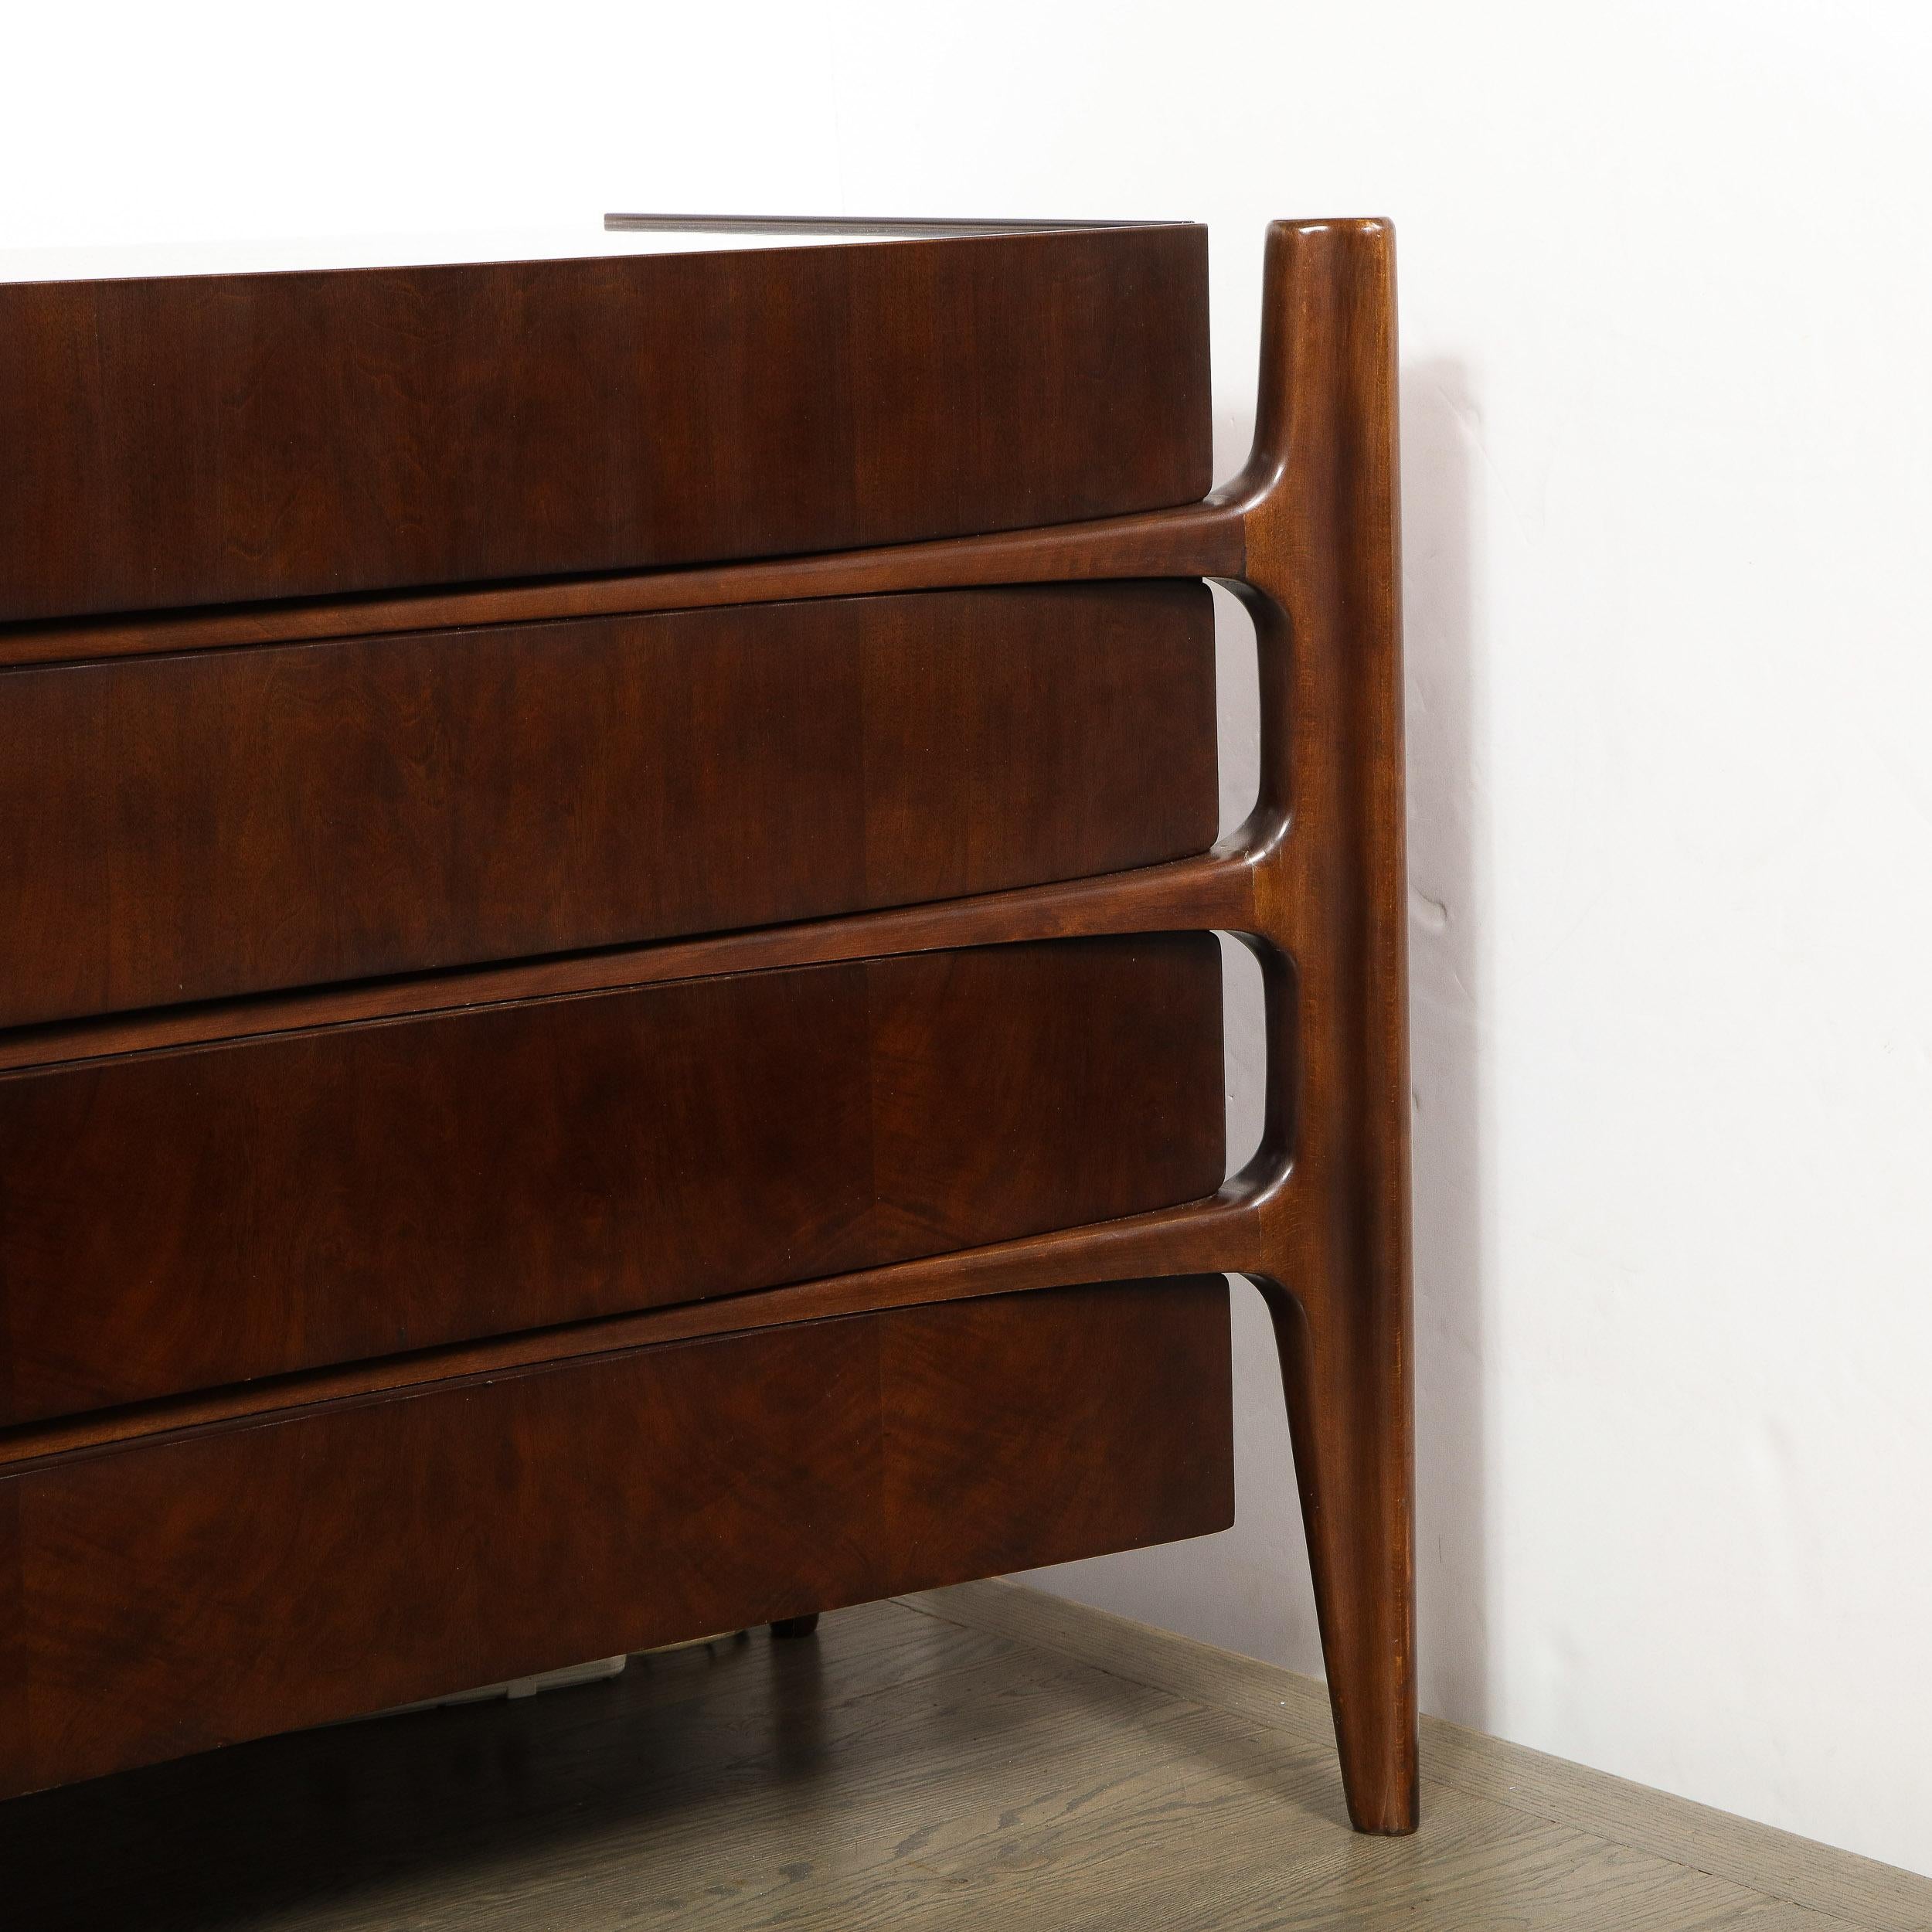 The celebrated Mid-Century Modern Swedish designer William Hinn realized this exceptional and rare eight-drawer walnut dresser, circa 1950. It features four splines, detached from the body of the cabinet, that descend into tapered legs. The splines